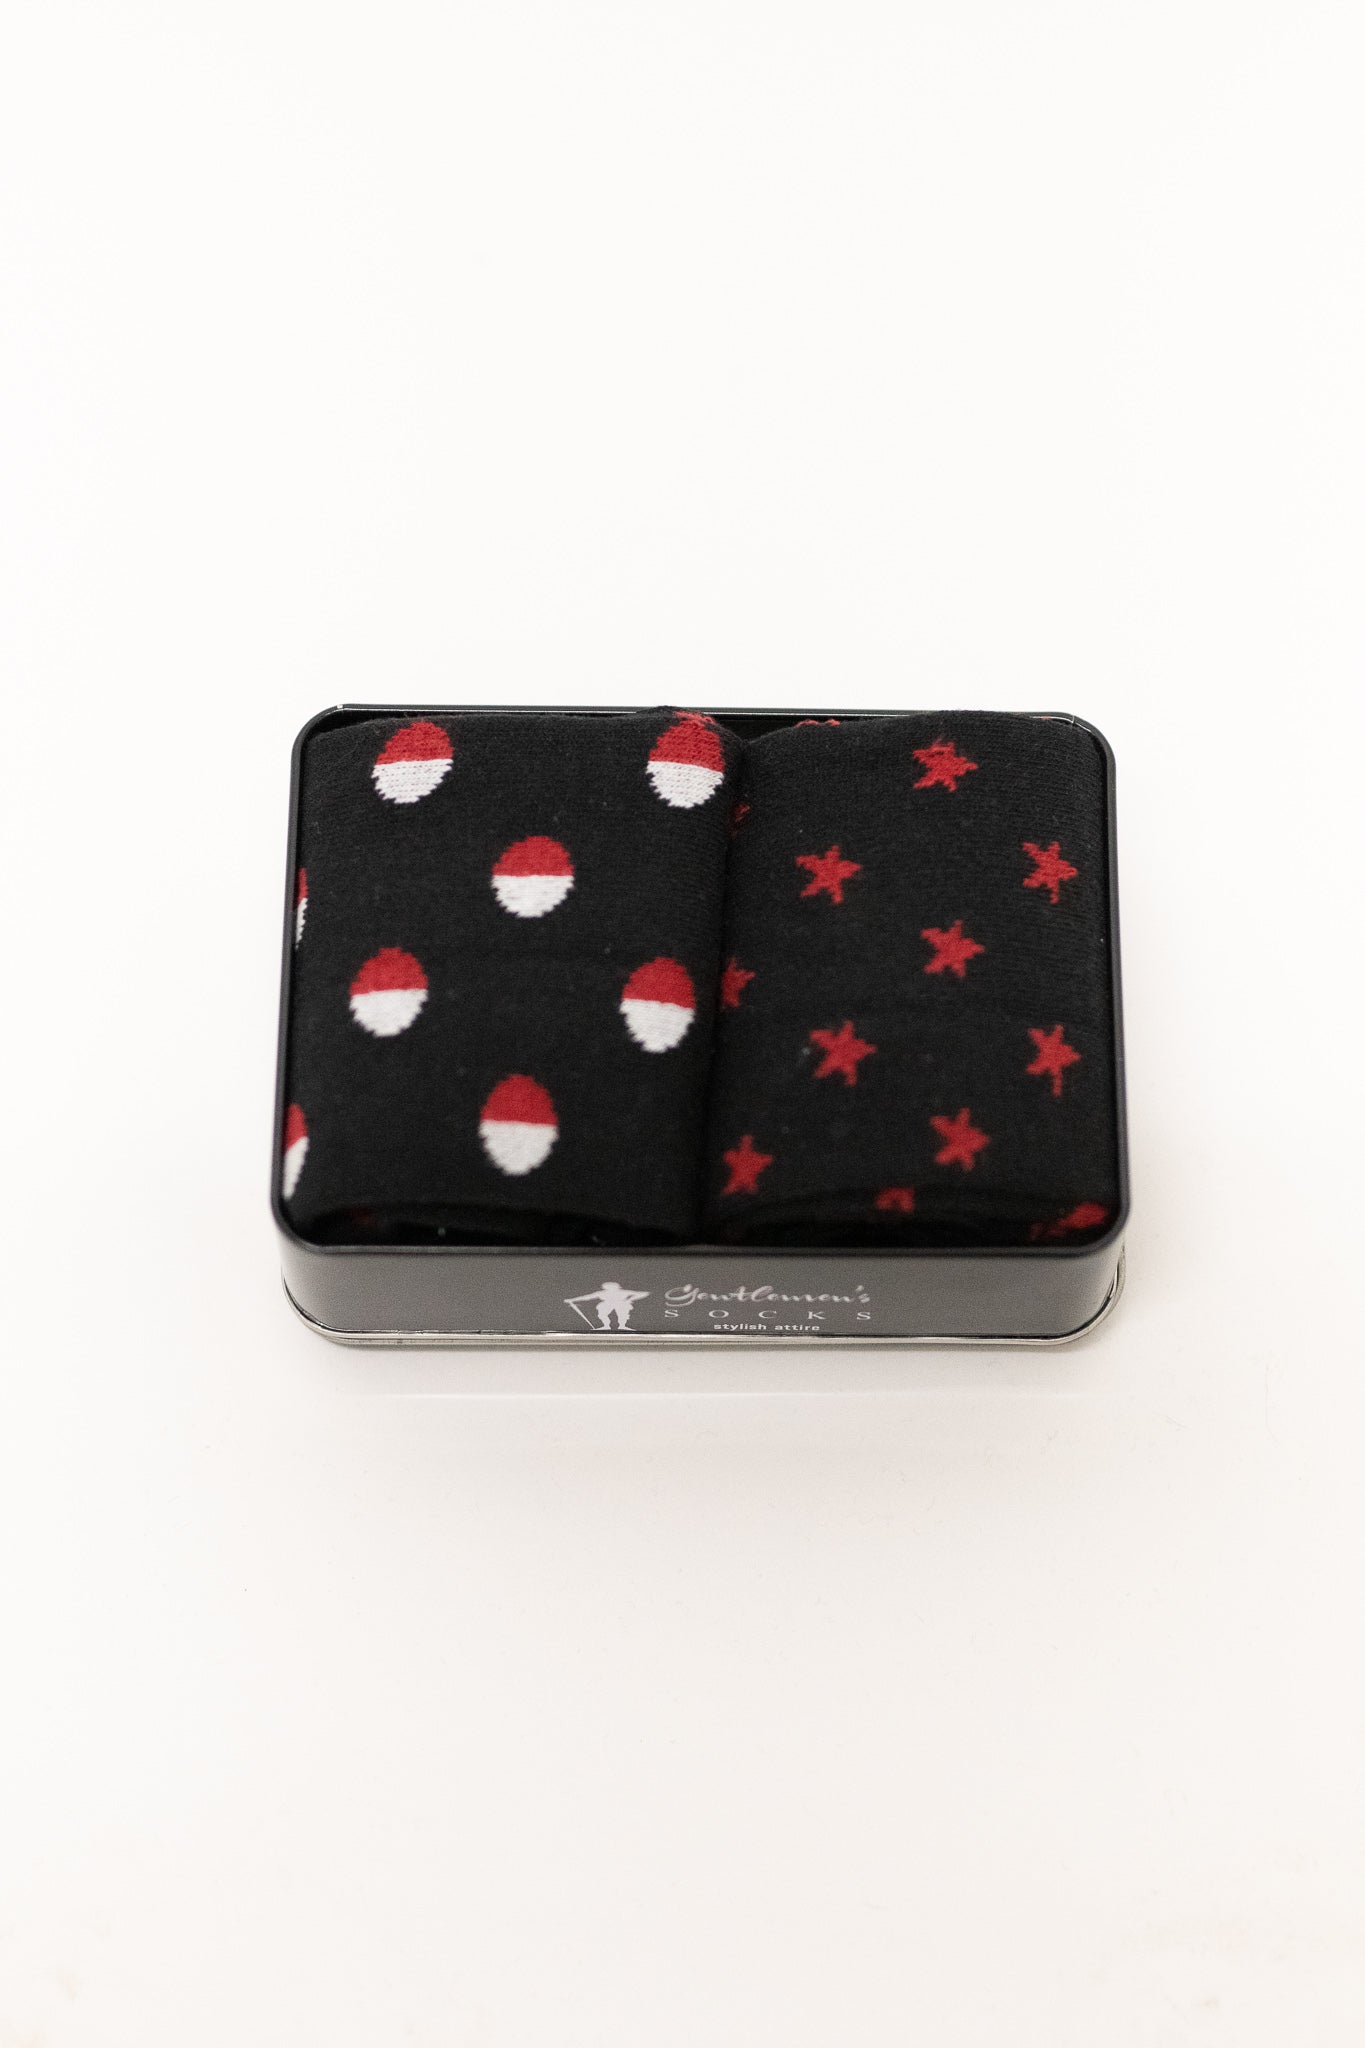 Gentlemen's Socks Gift Tin - Black with White & Red Dots and Black with Red Stars One Size